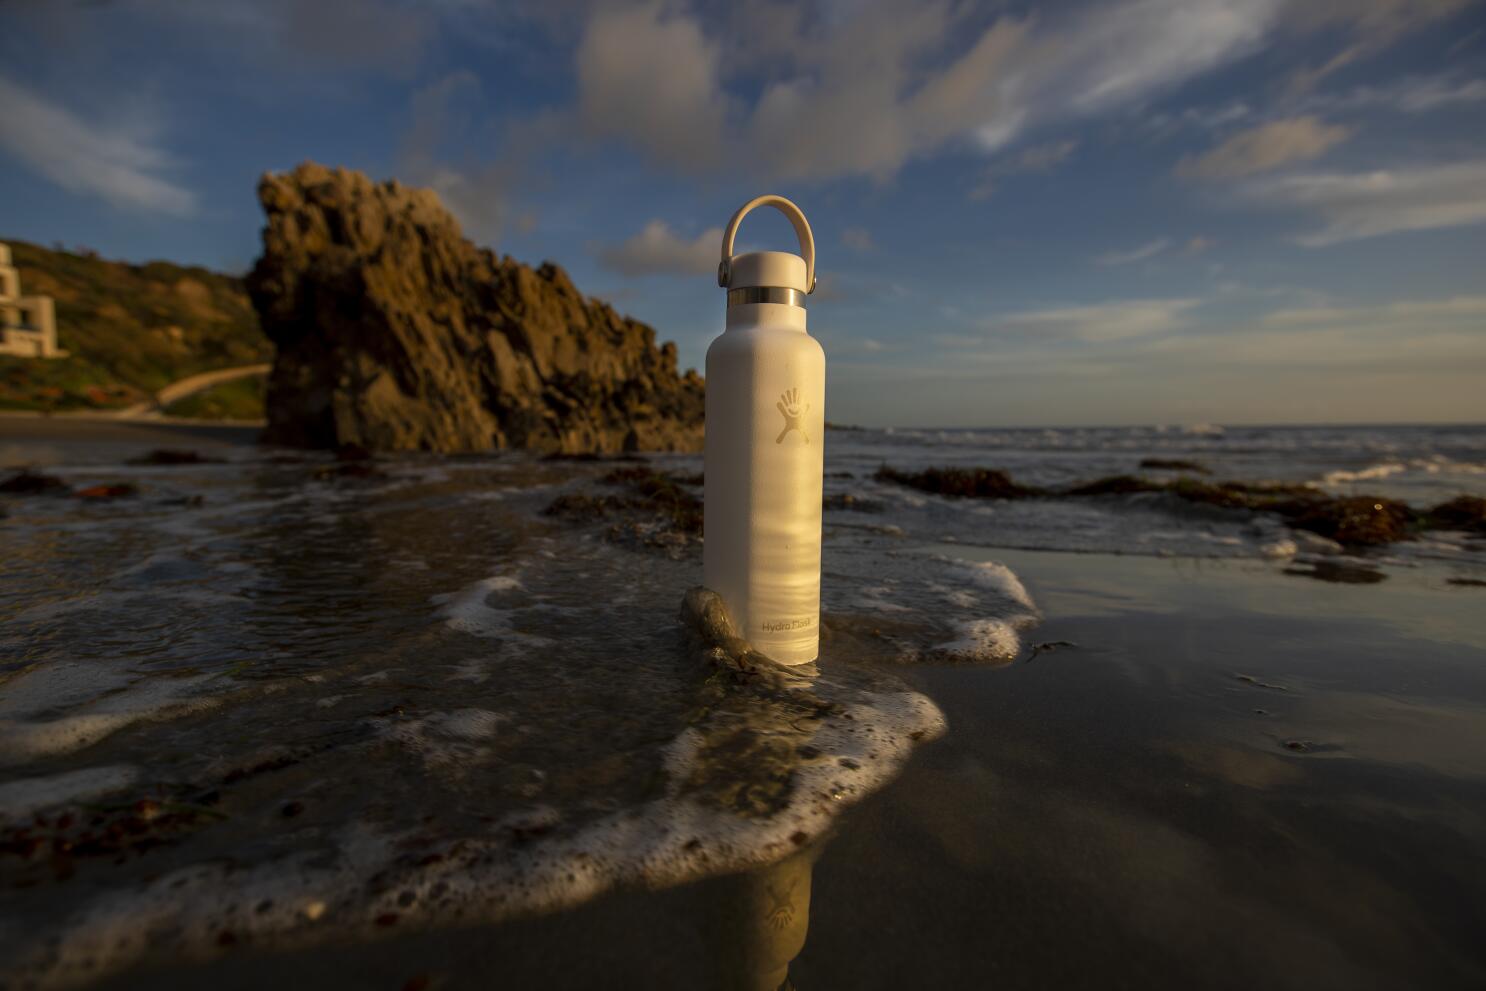 Hydro Flask Review: Why Gen Z's Favorite Water Bottle Lives Up to the Hype